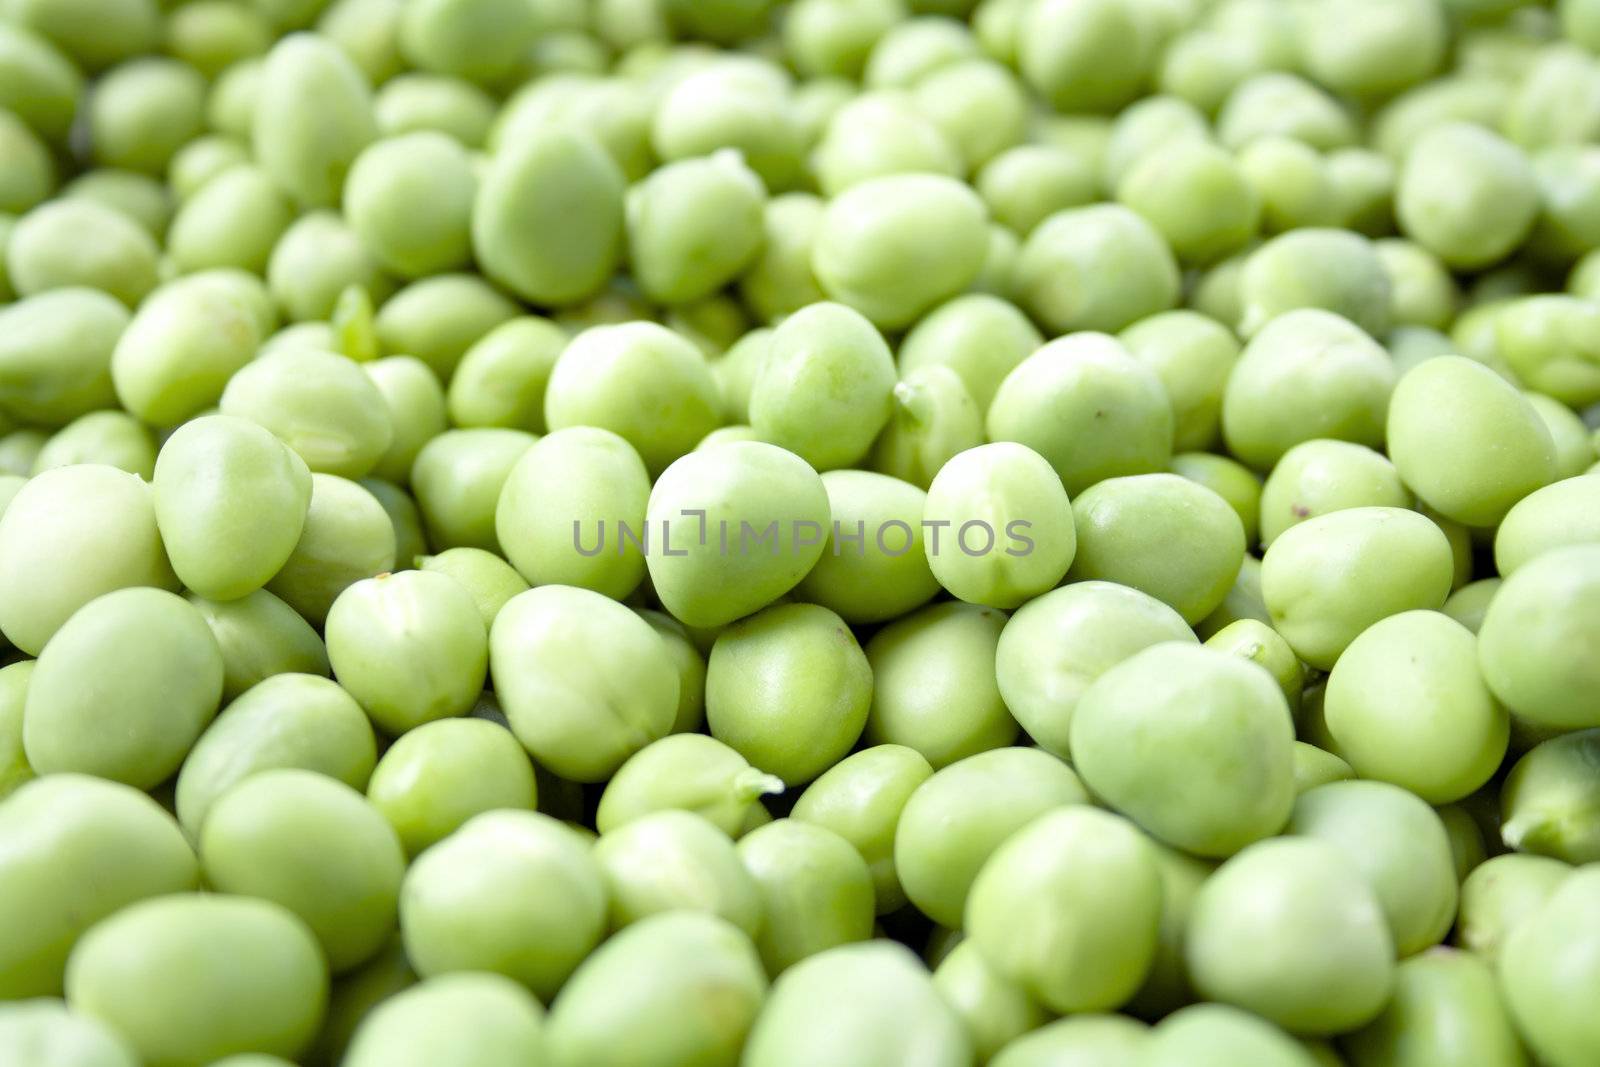 Peas by magraphics